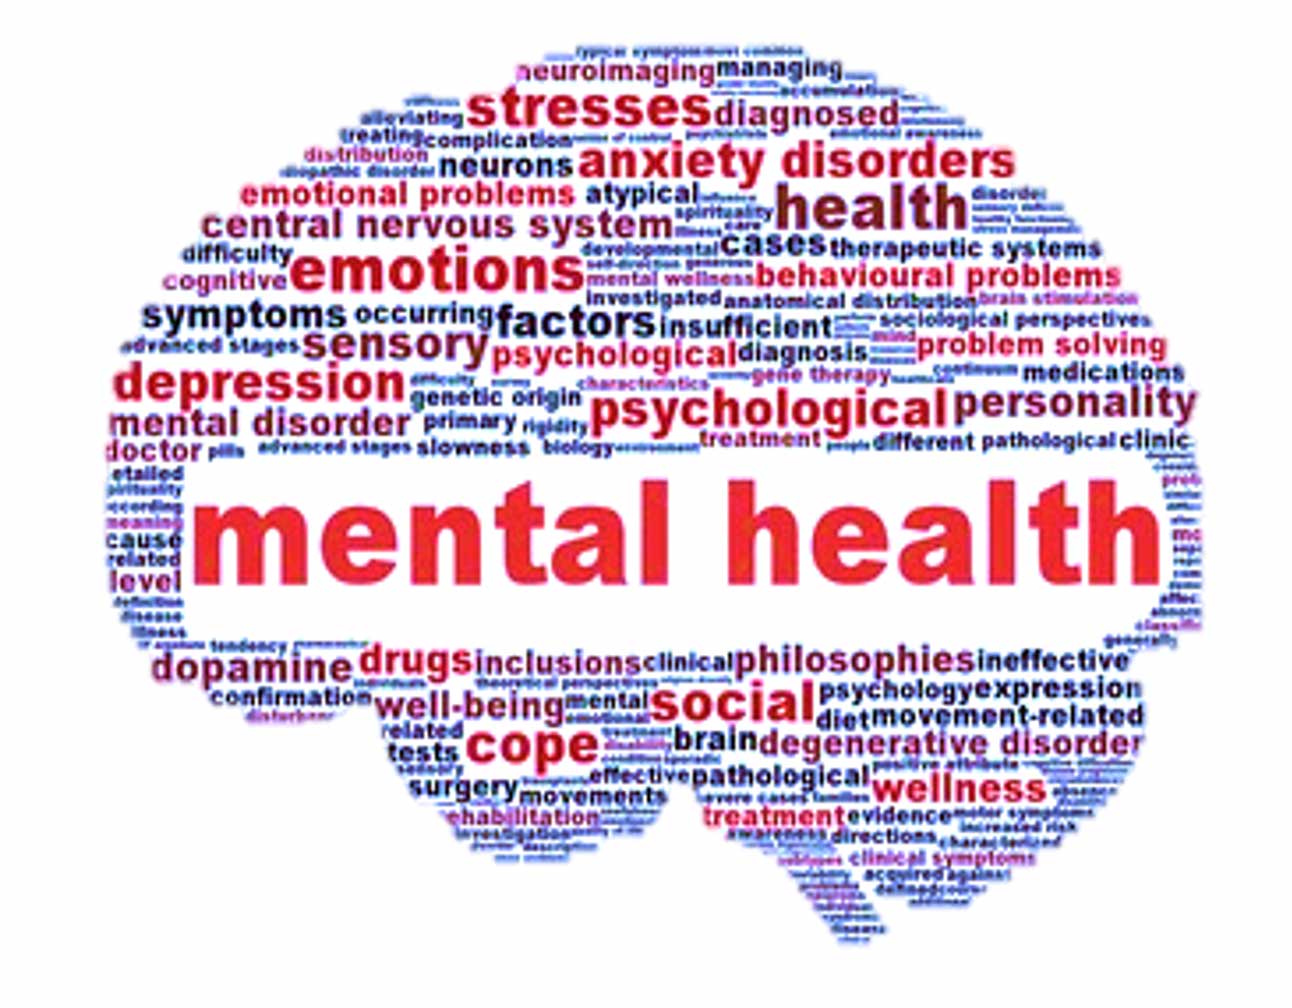 How Are Mental and Emotional Health Related?